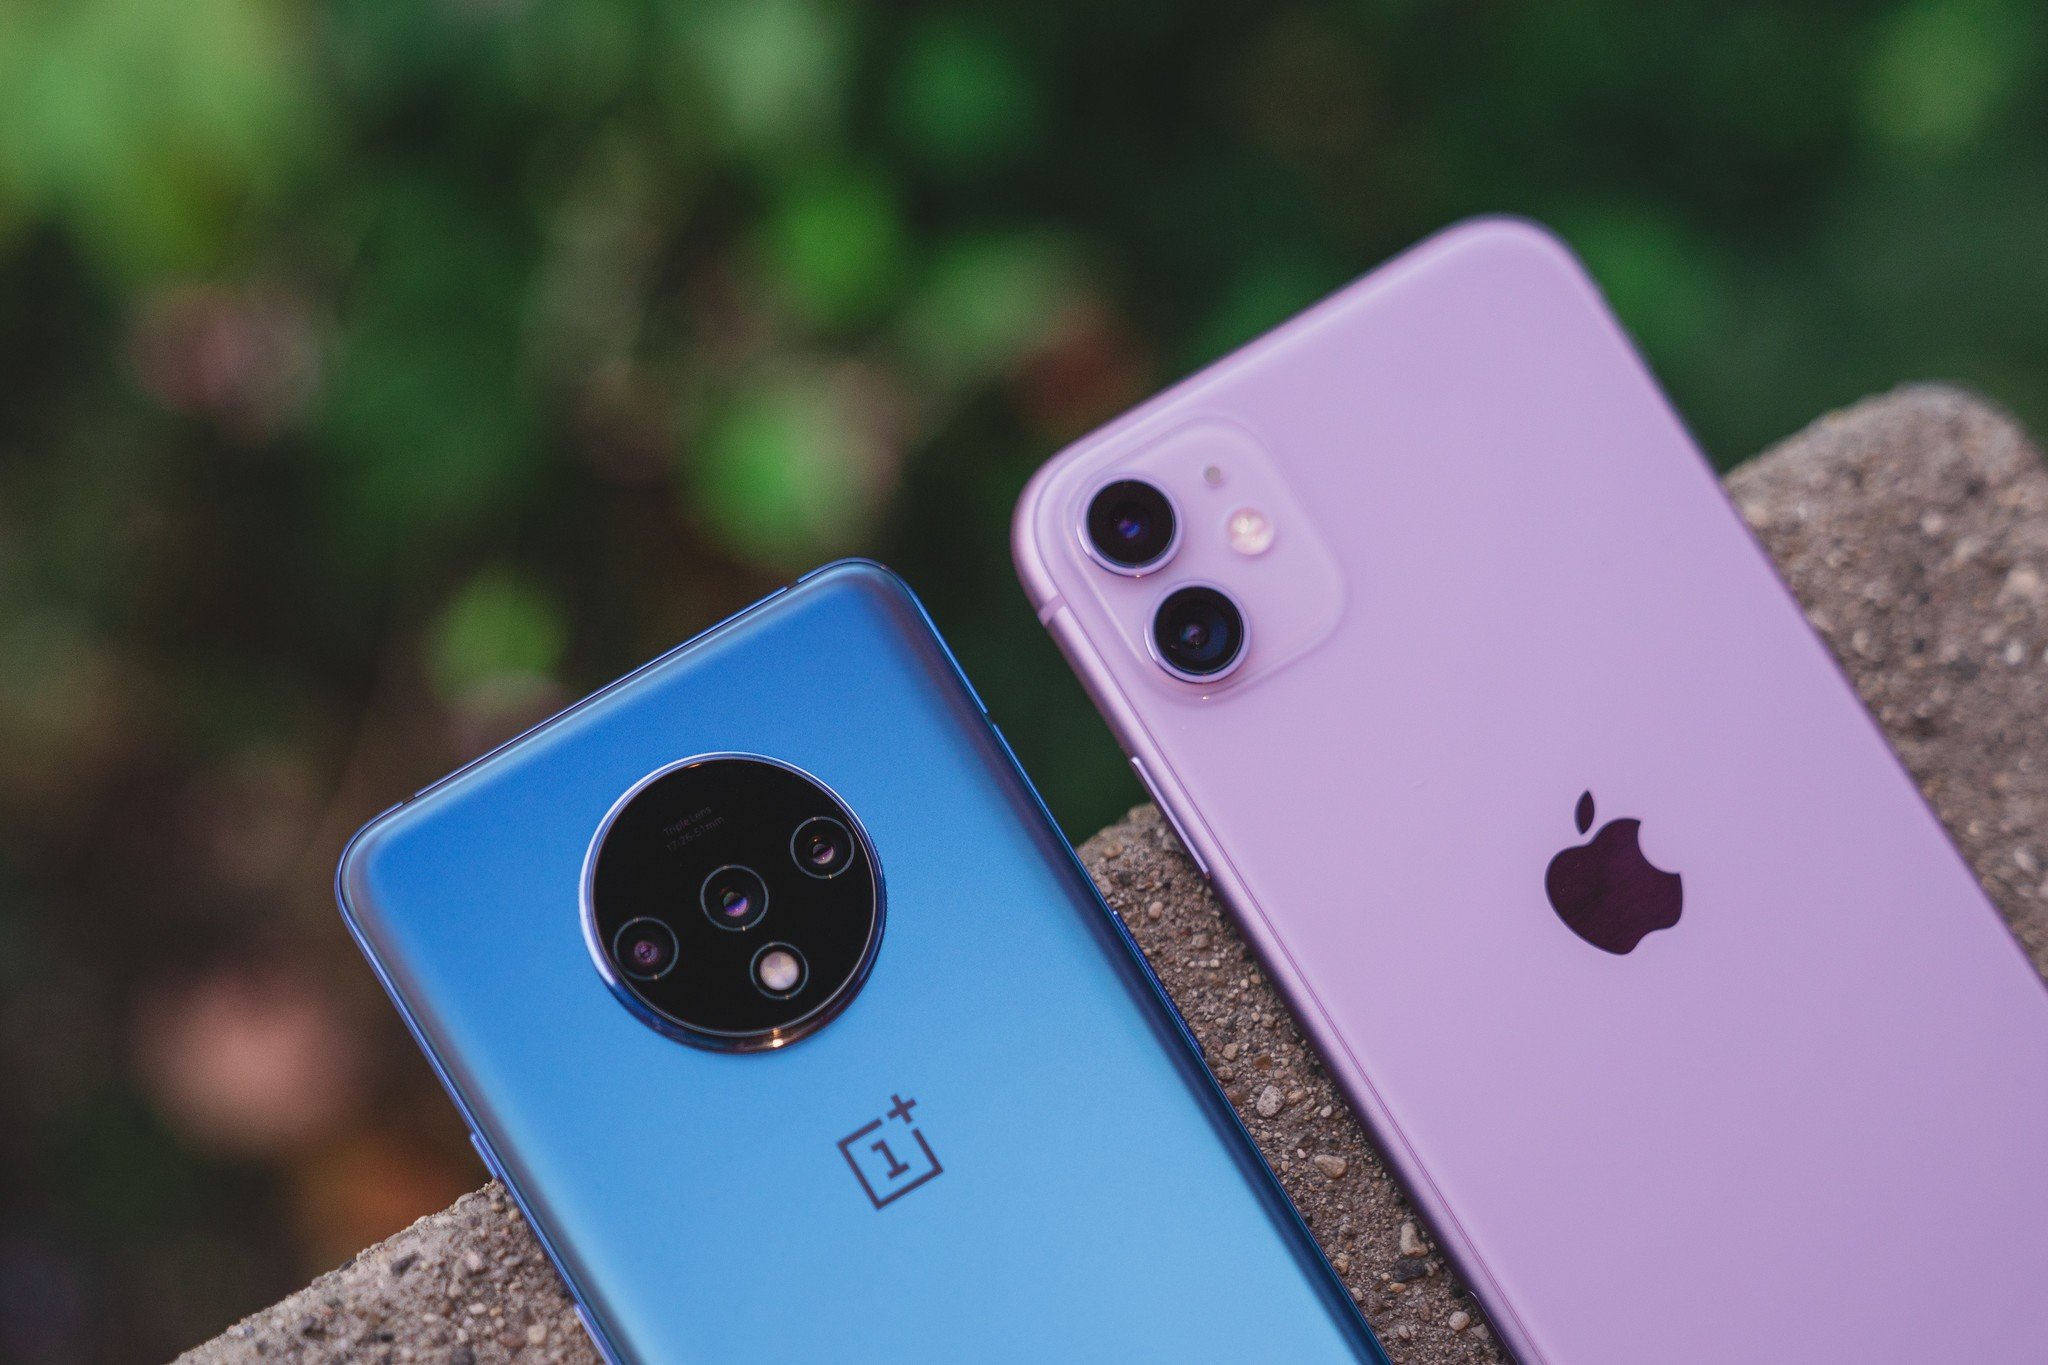 Camera closeup of the OnePlus 7T and iPhone 11